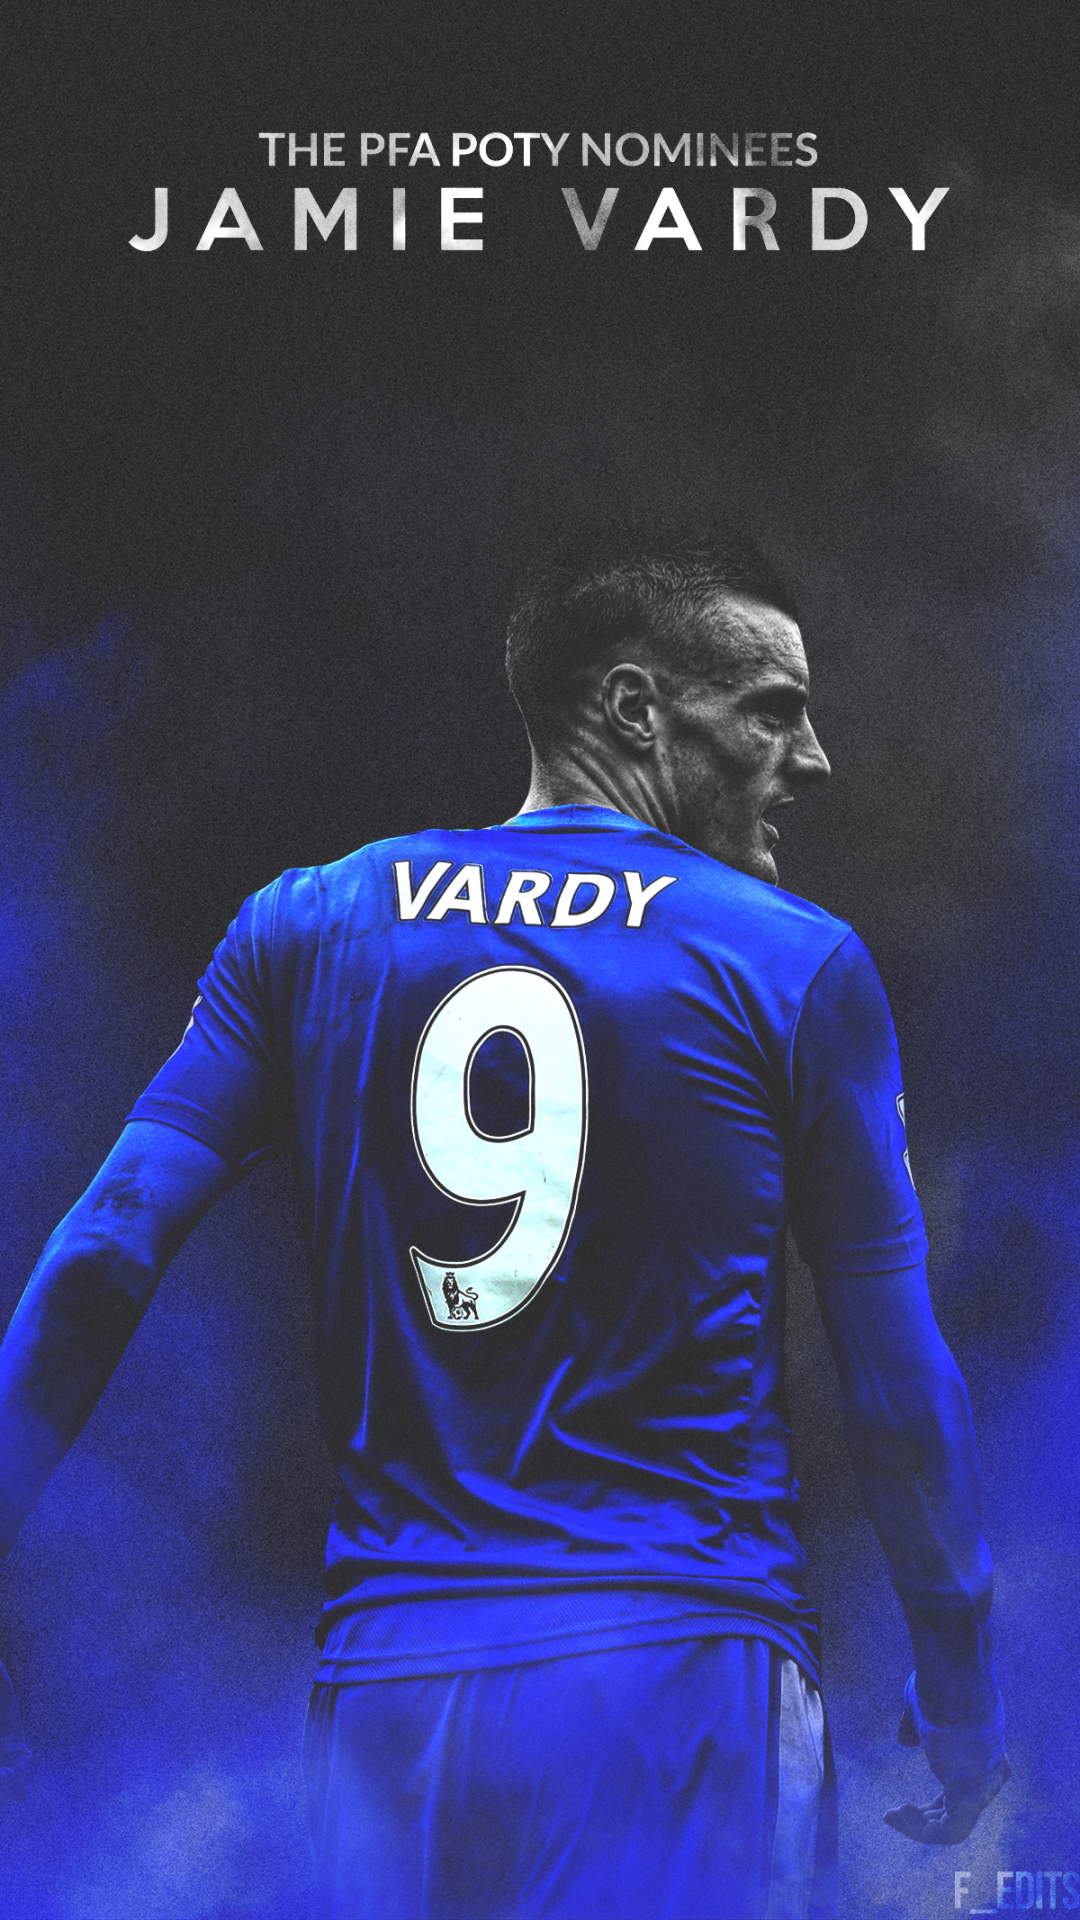 The Pfa Player Of The Year Nominees - Jamie Vardy - HD Wallpaper 